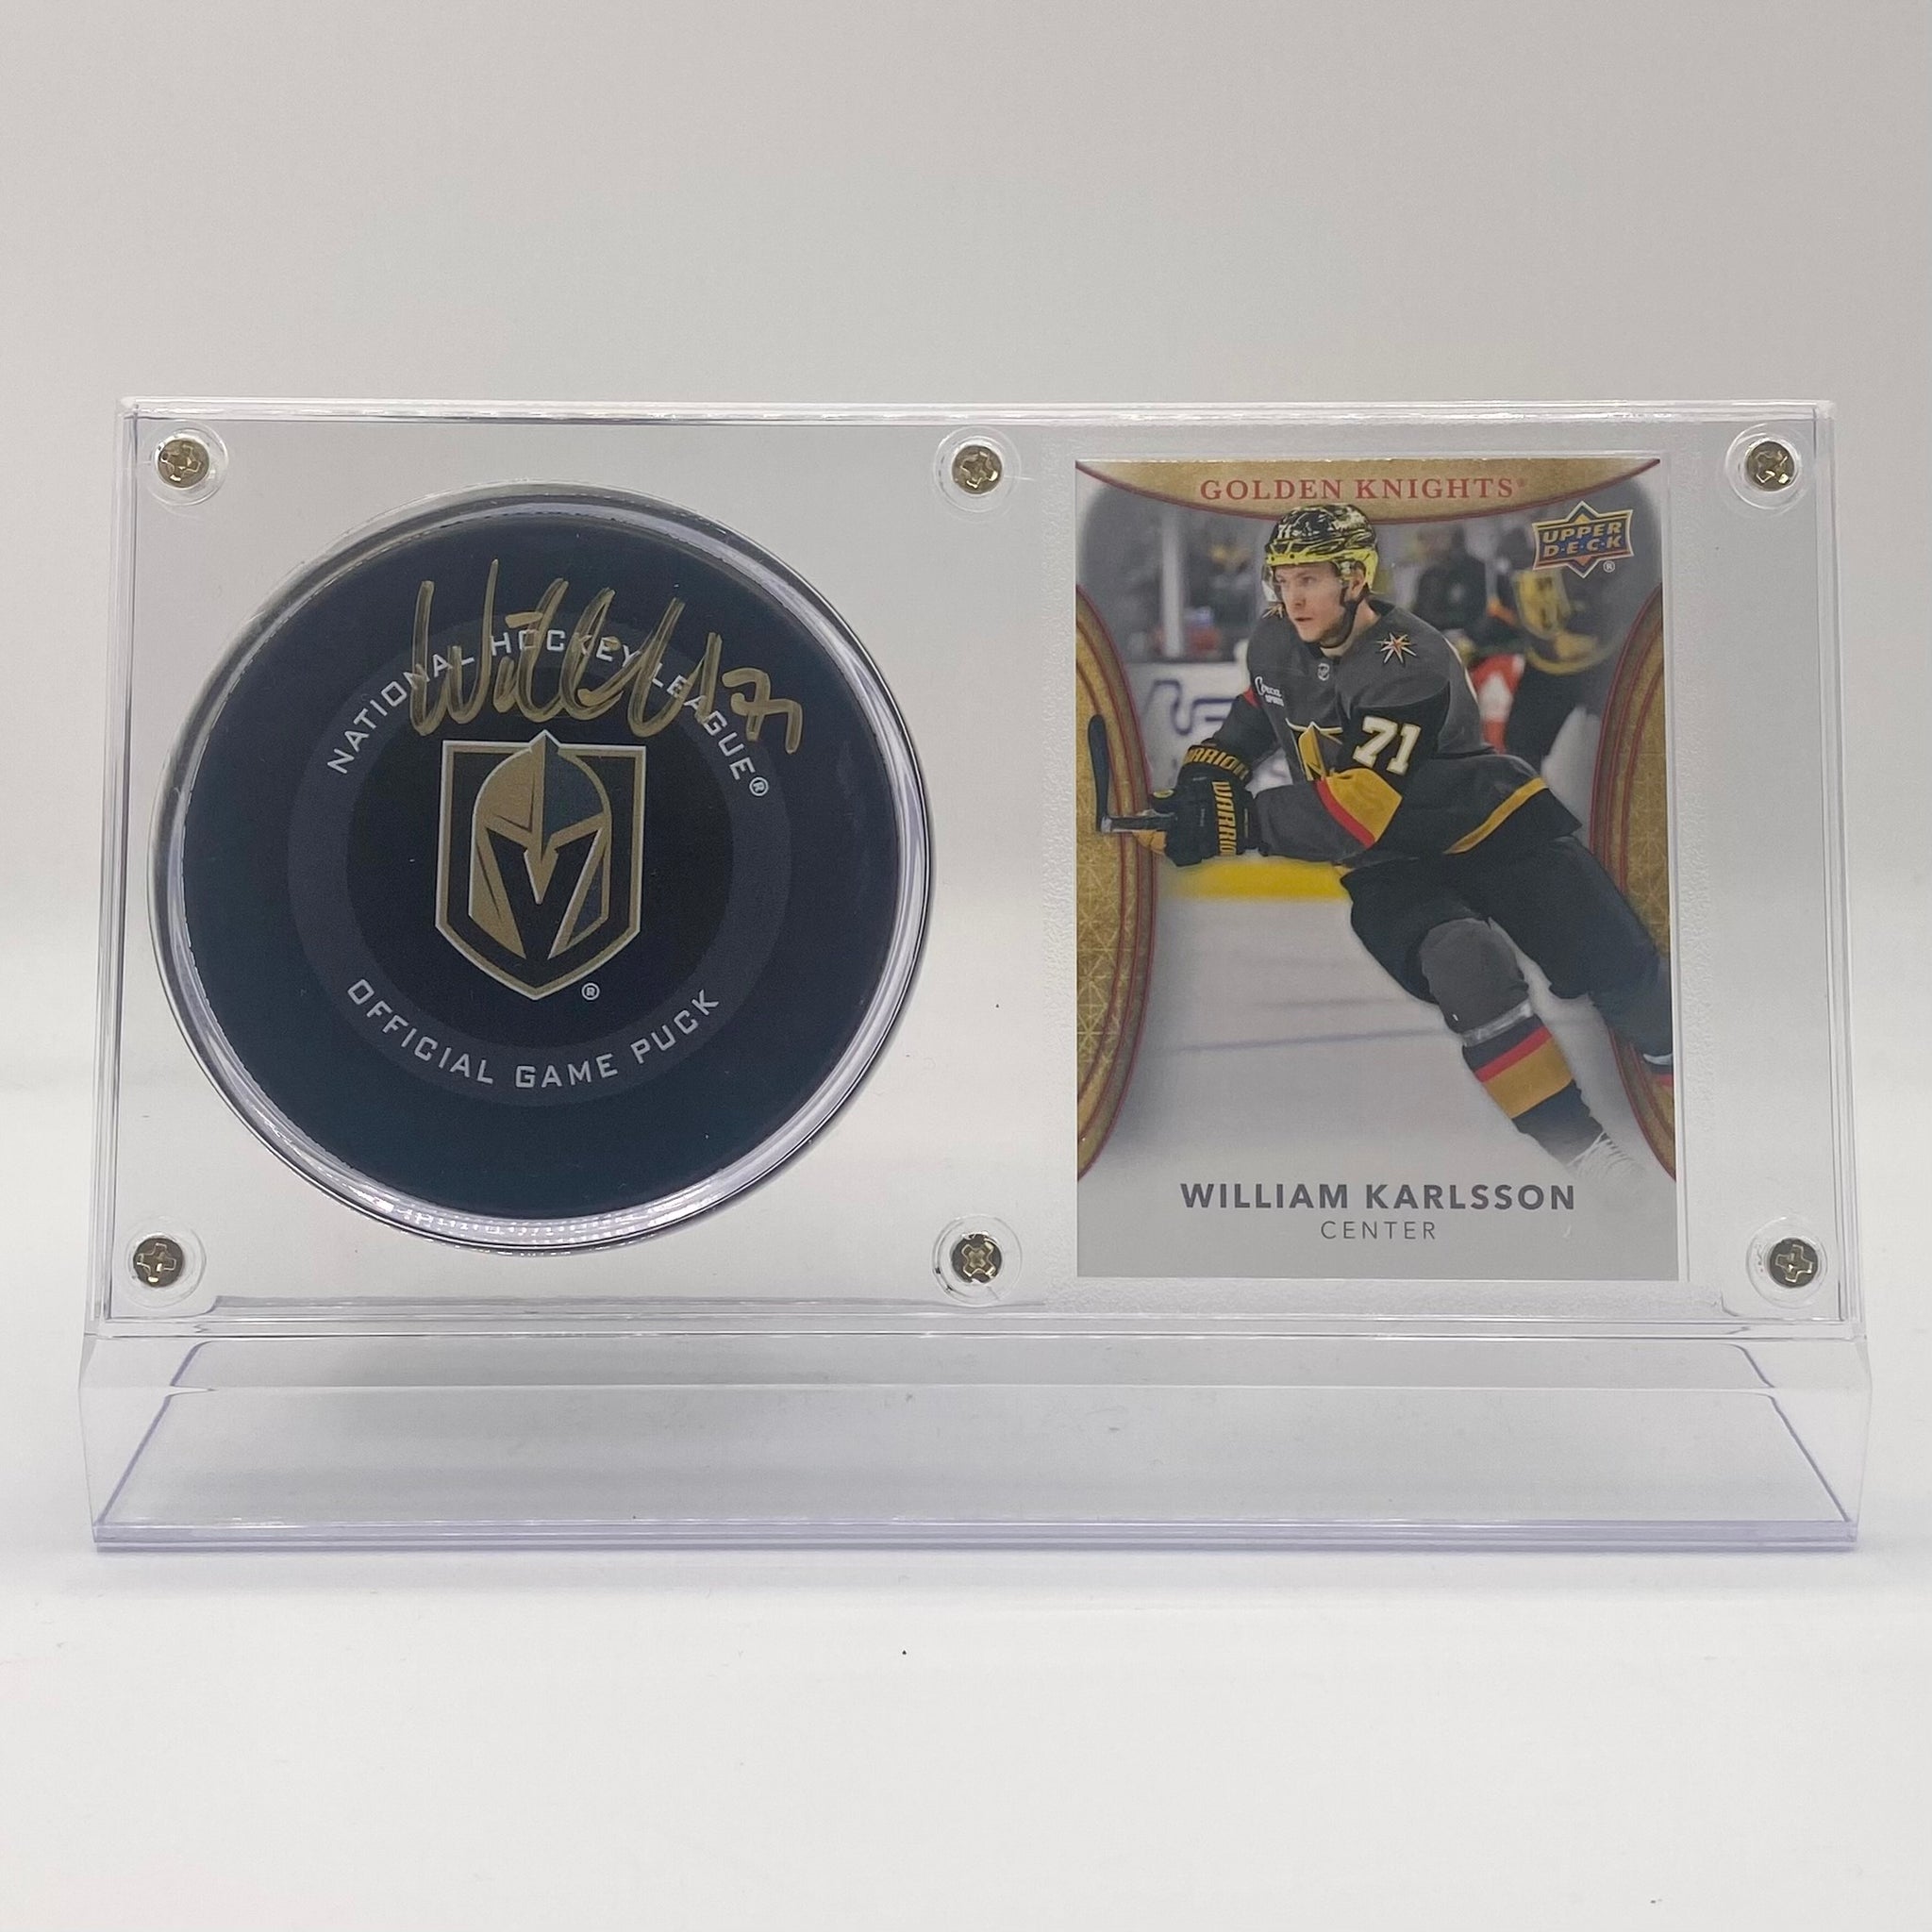 William Karlsson Vegas Golden Knights Autographed Hockey Puck and Trading Card Case